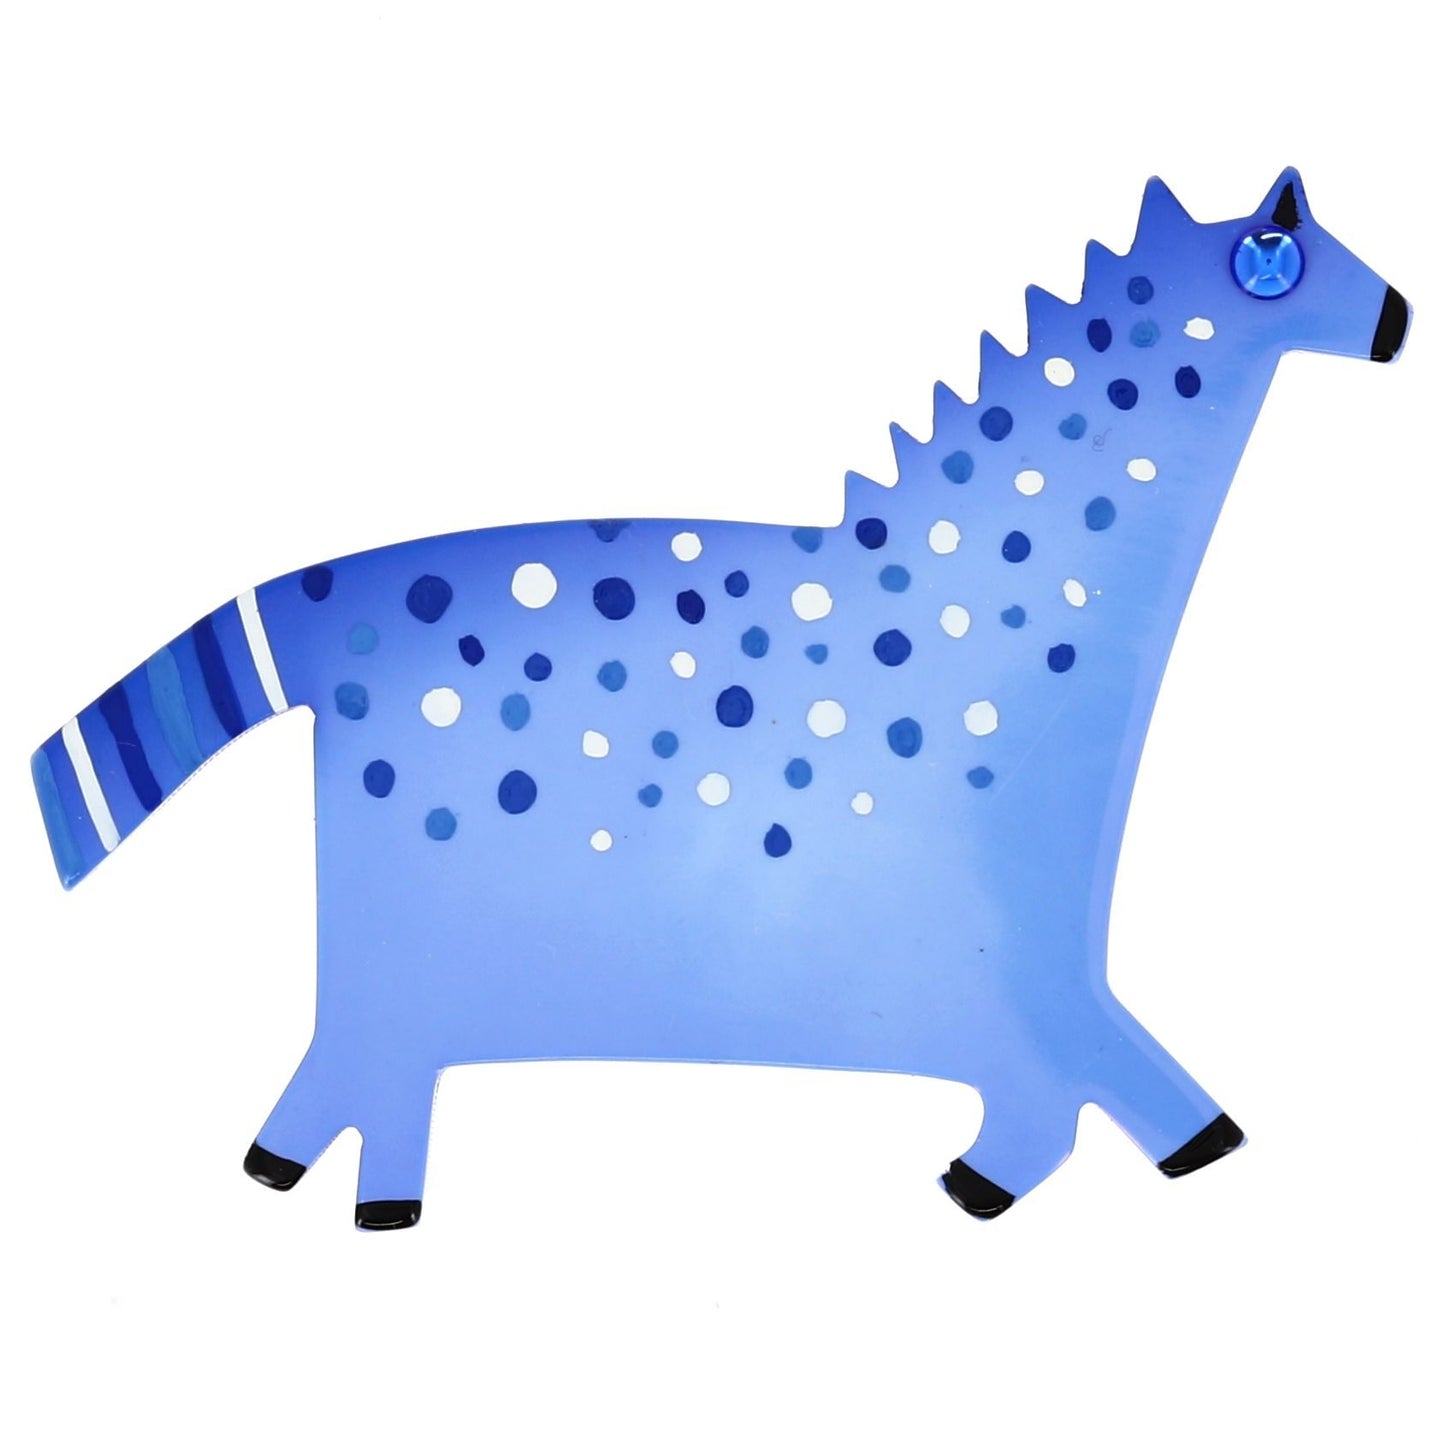  Dotted Azure Blue Horse Brooch in galalith